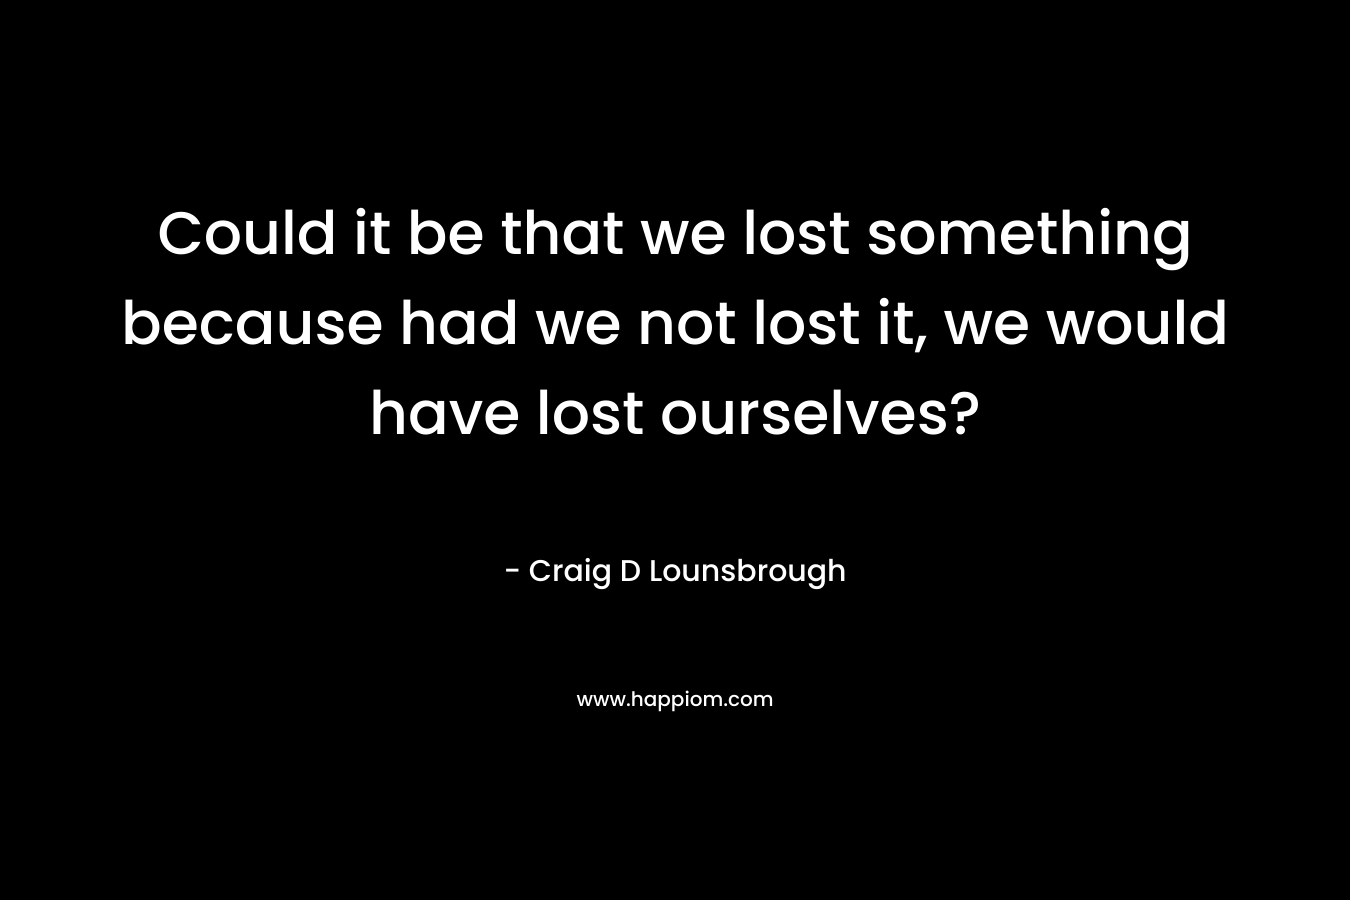 Could it be that we lost something because had we not lost it, we would have lost ourselves?